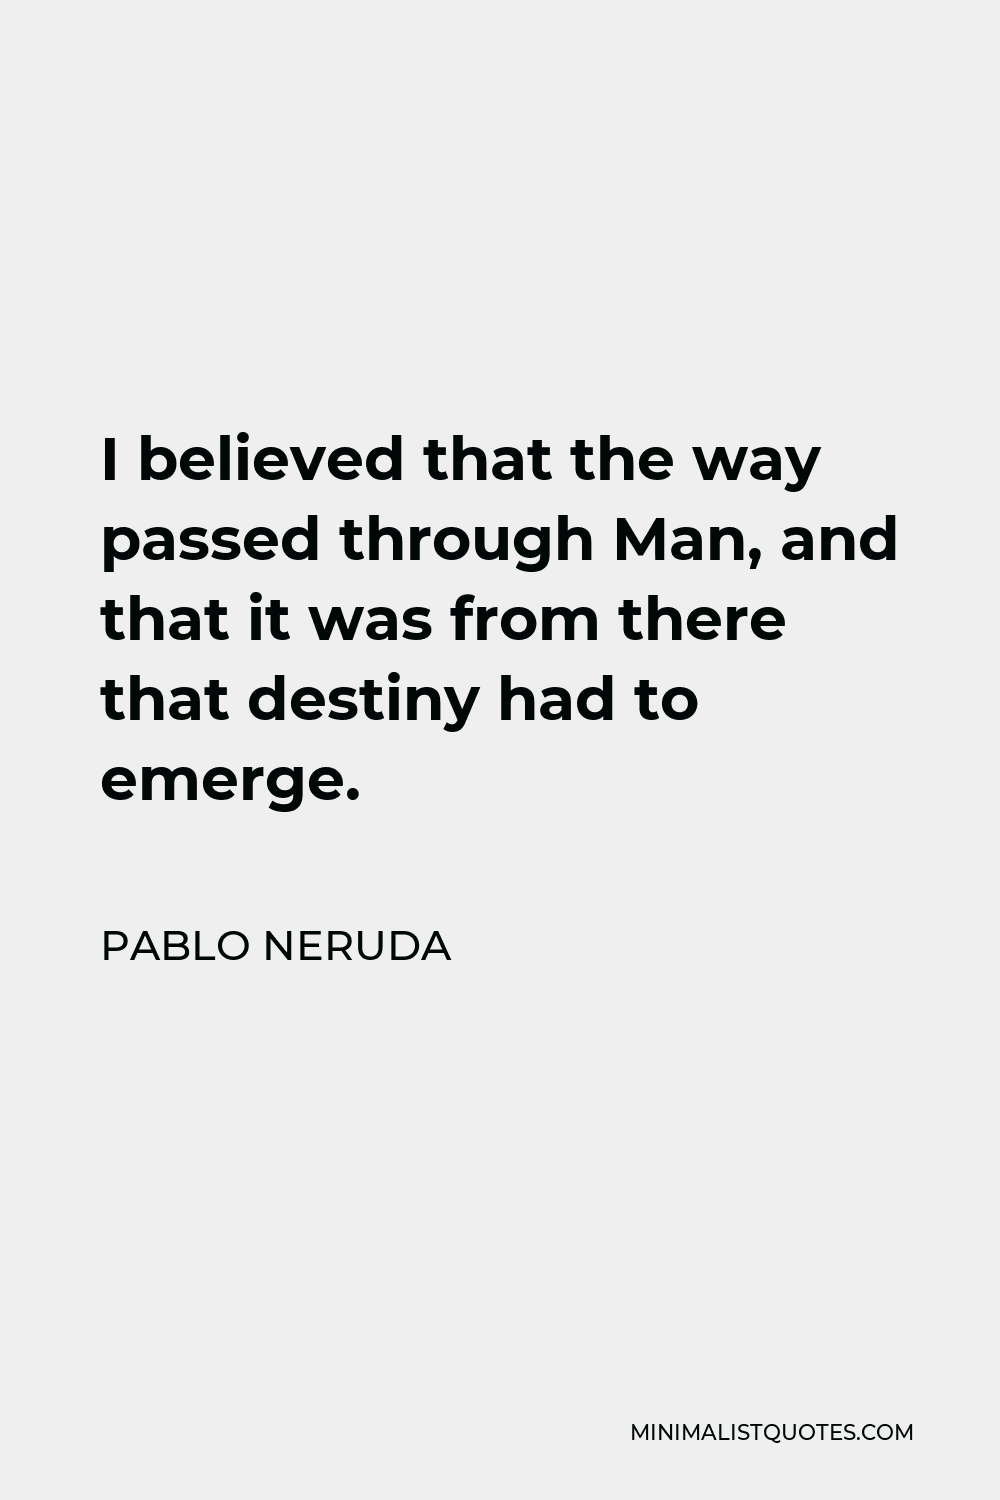 Pablo Neruda Quote - I believed that the way passed through Man, and that it was from there that destiny had to emerge.